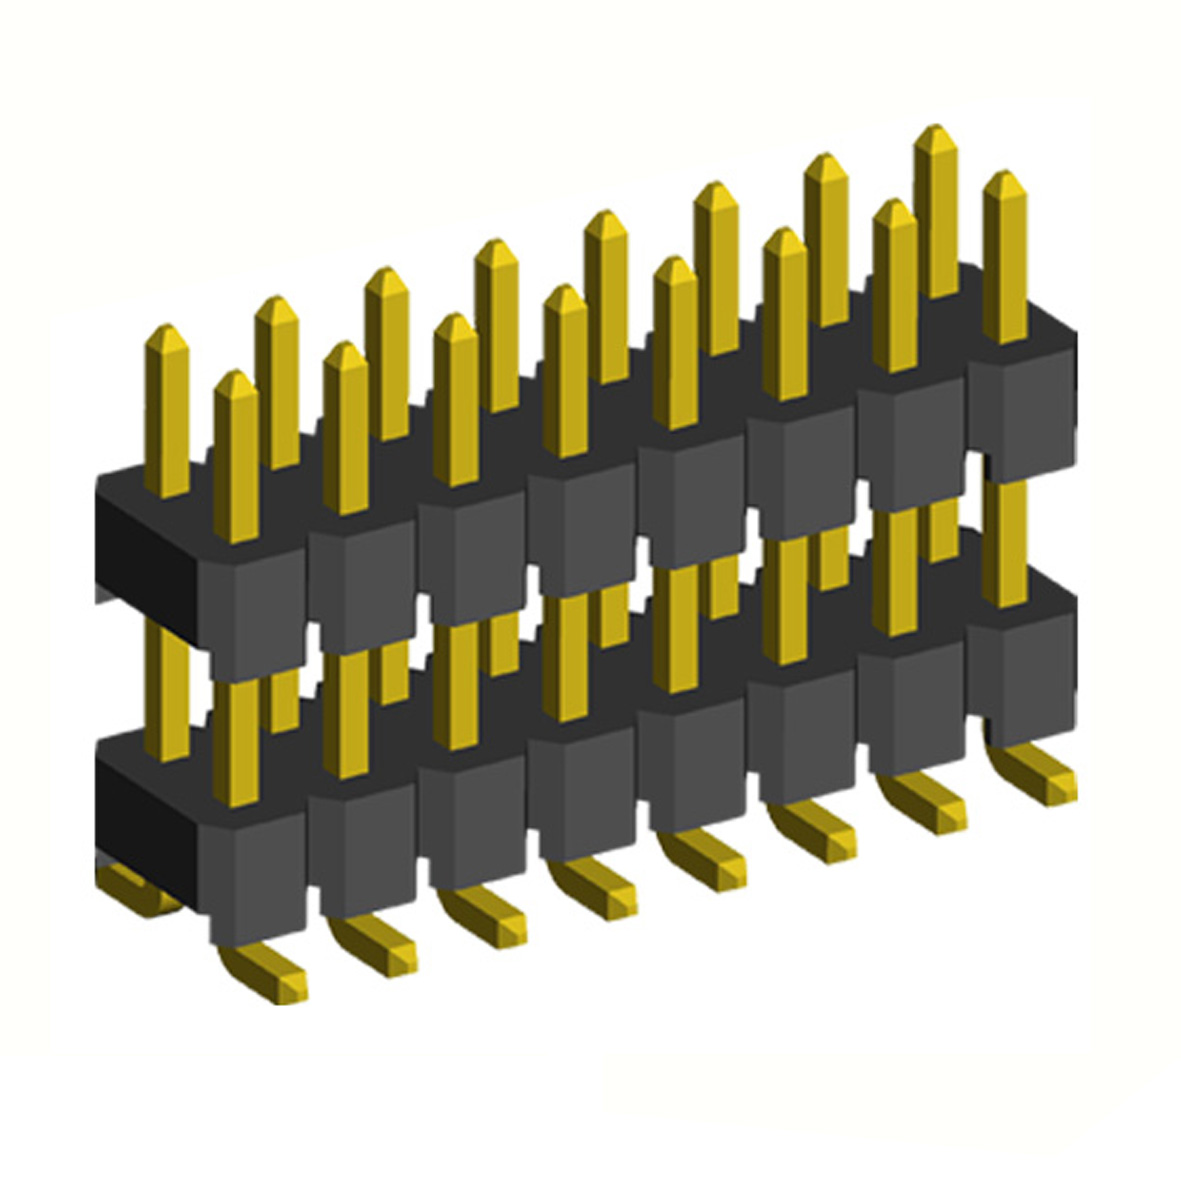 2213SMDI-XXG (PLHD-XXS) series, pin headers straight double row with double insulator on Board for surface (SMD) mounting, pitch 2,54x2,54 mm, Board-to-Board connectors, pin headers and sockets > pitch 2,54x2,54 mm